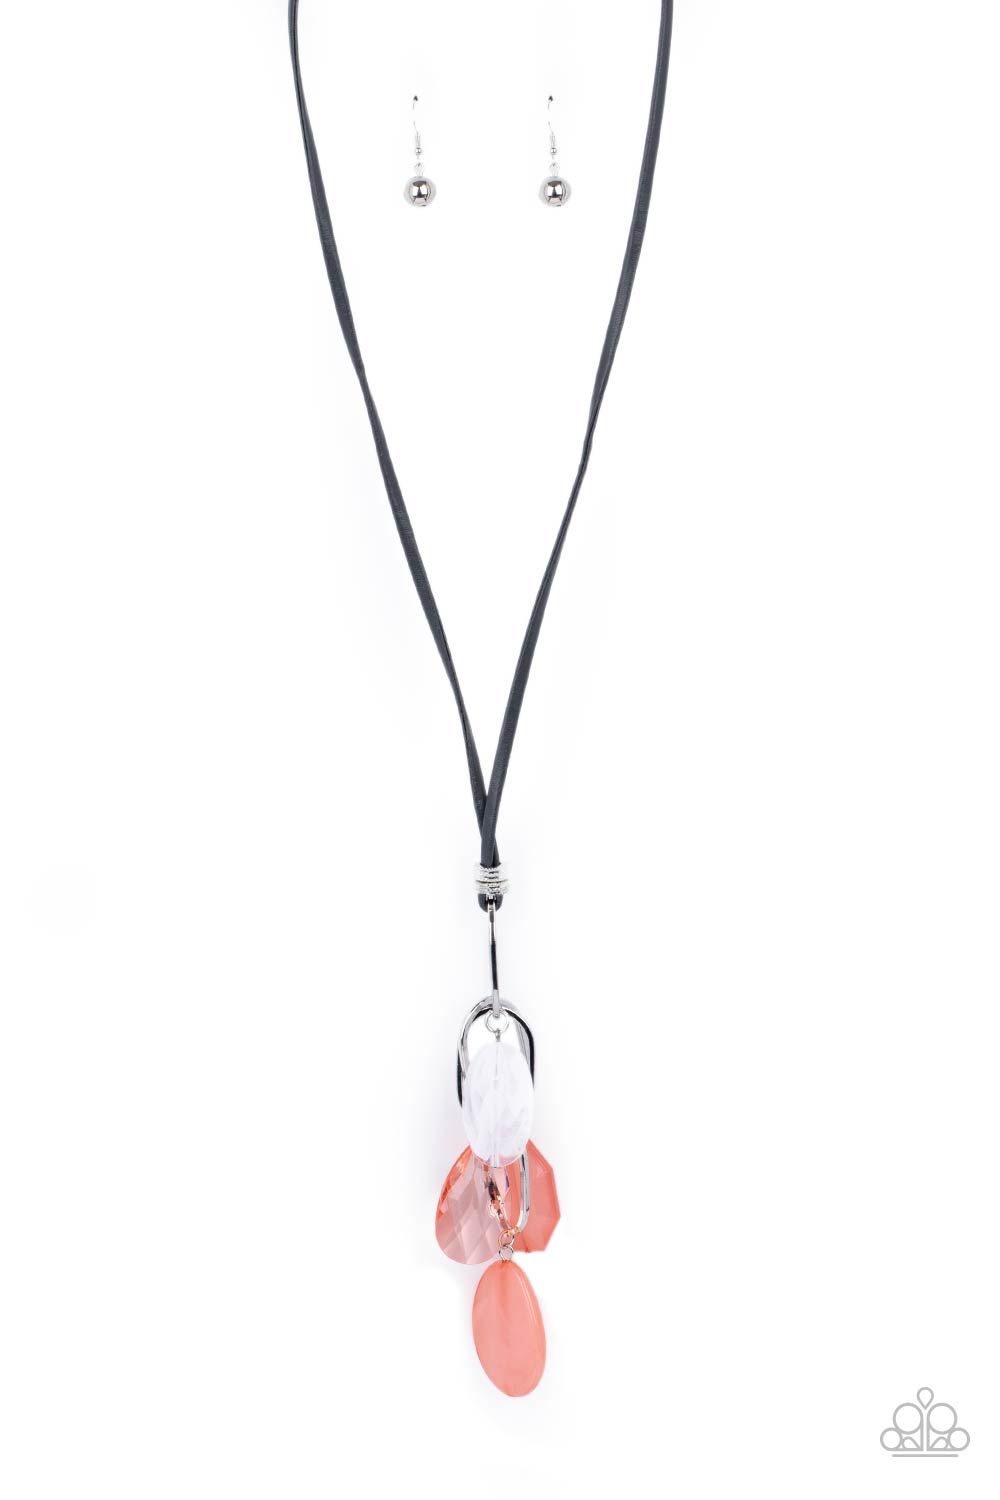 Fundamentally Flirtatious Orange and Silver Leather Necklace - Paparazzi Accessories- lightbox - CarasShop.com - $5 Jewelry by Cara Jewels